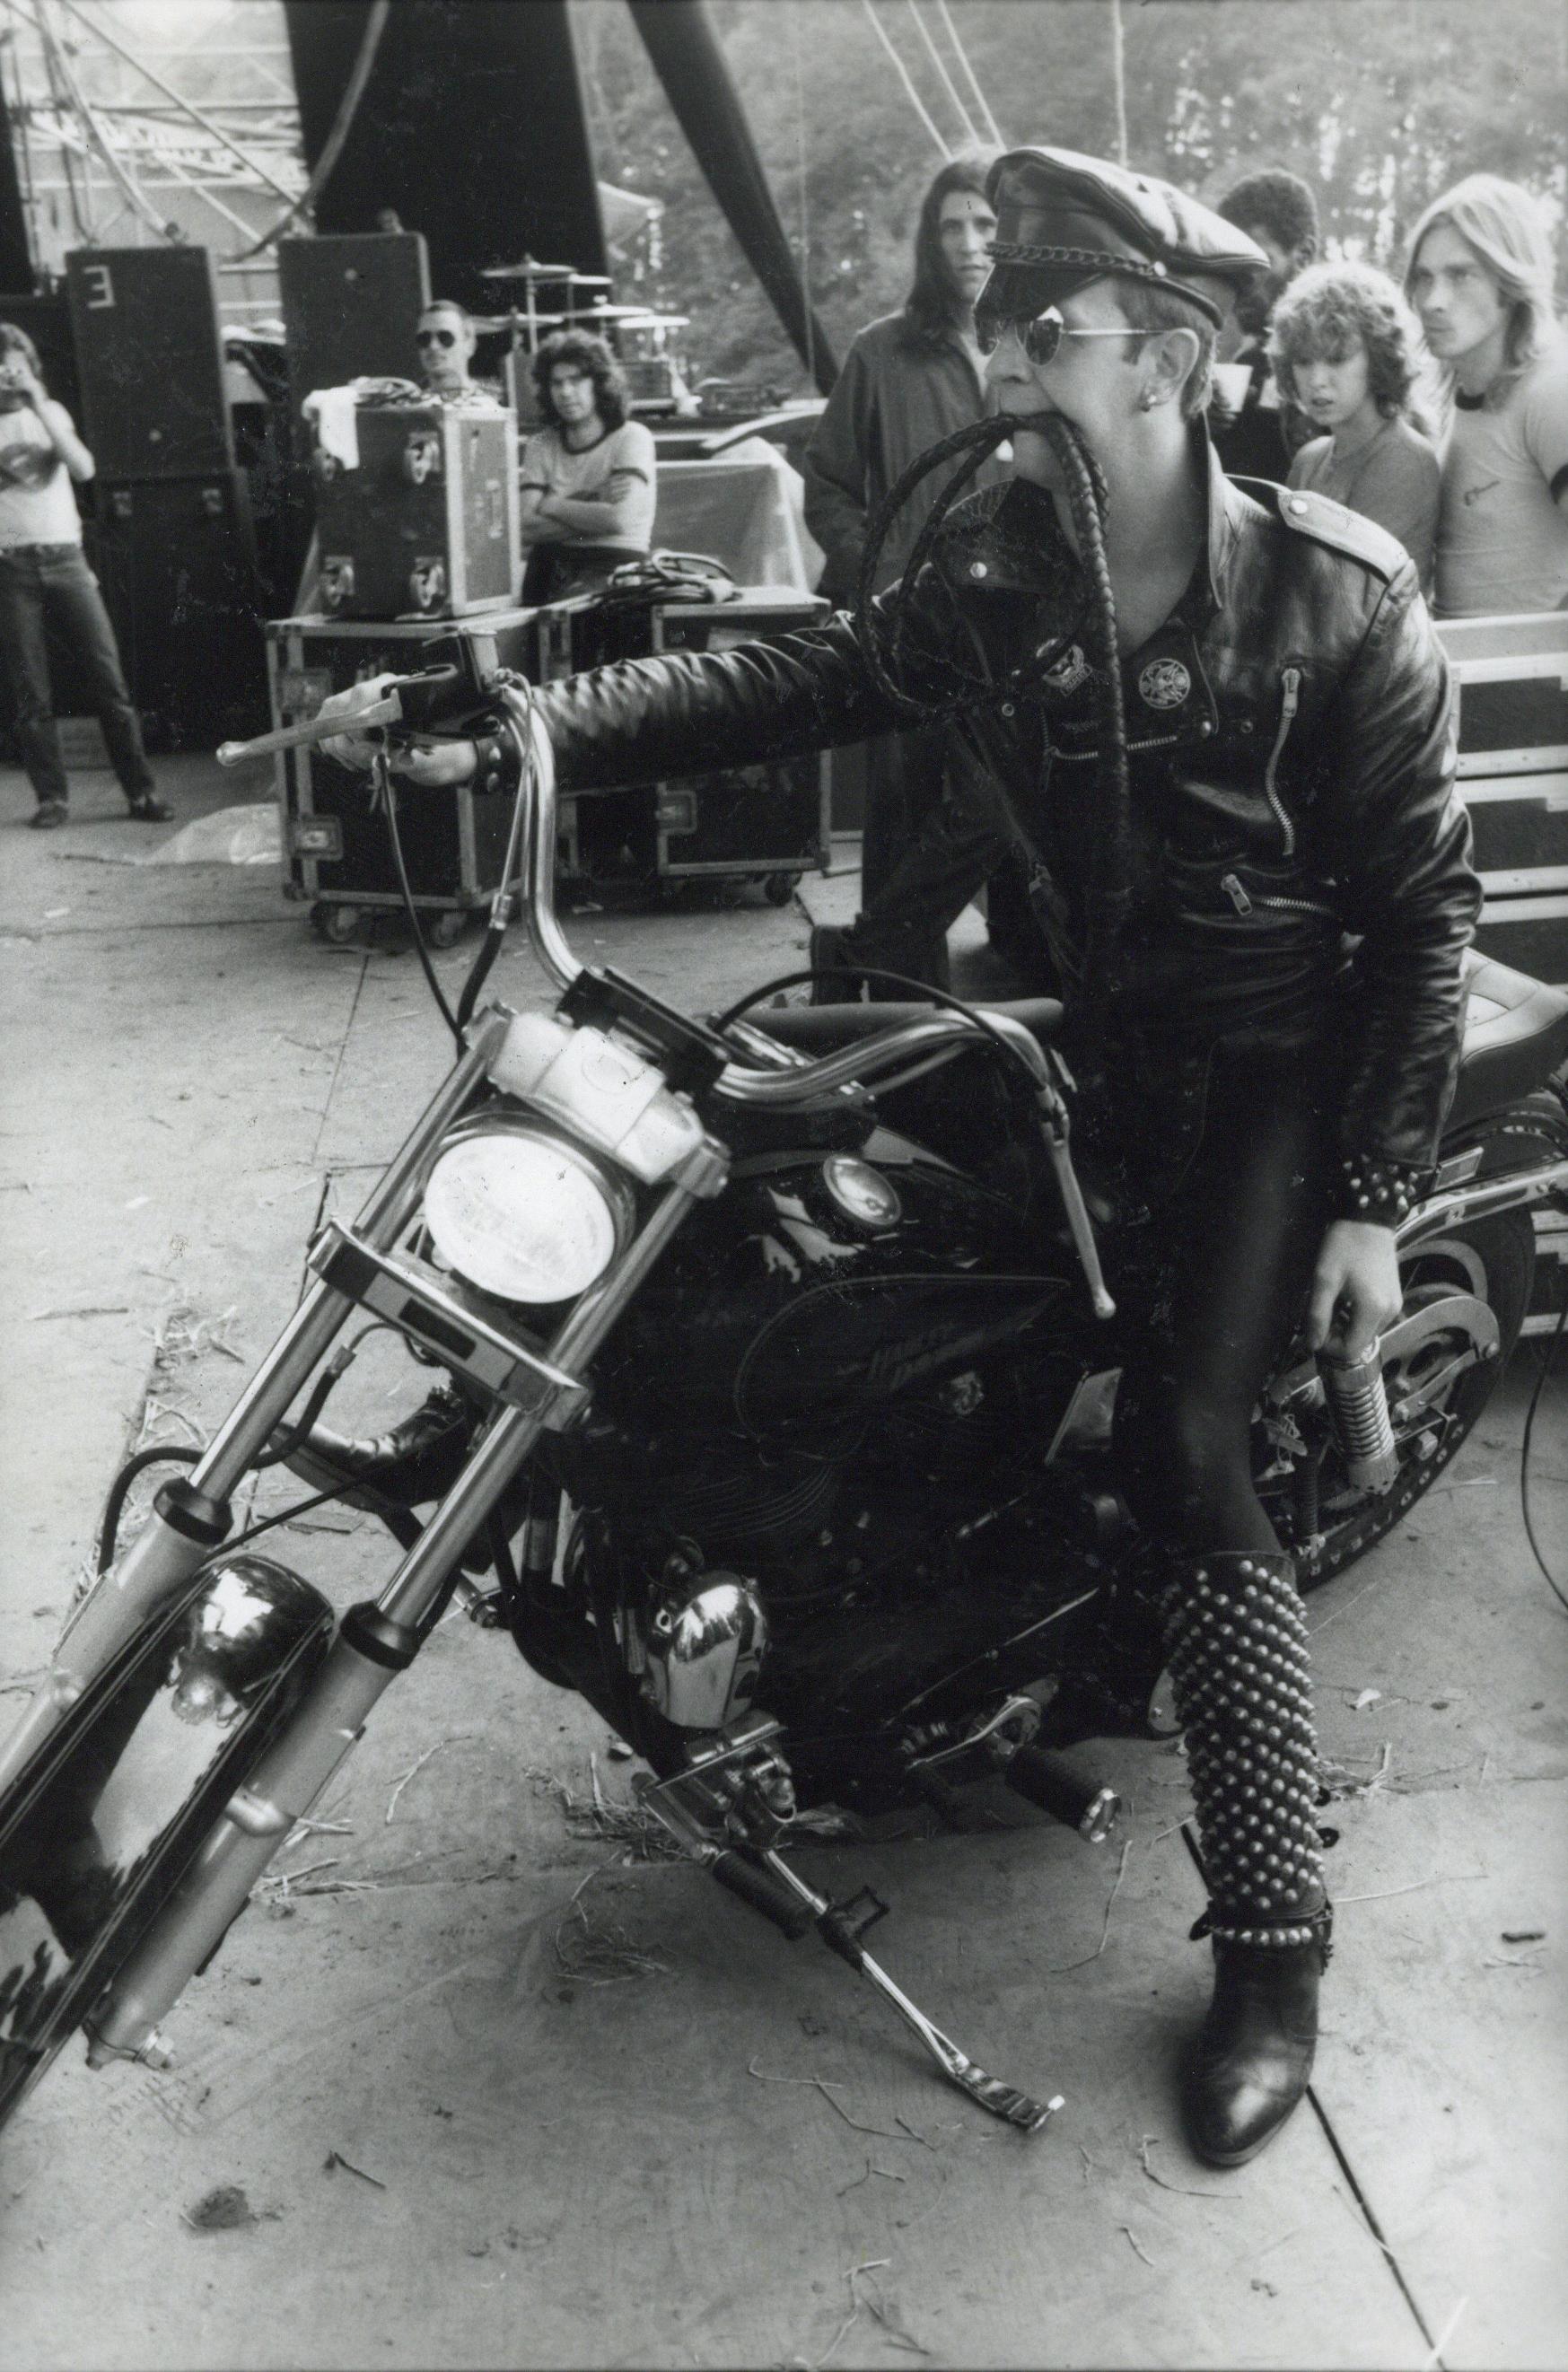 Paul Cox Black and White Photograph - Rob Halford of Judas Priest on Motorcycle Vintage Original Photograph